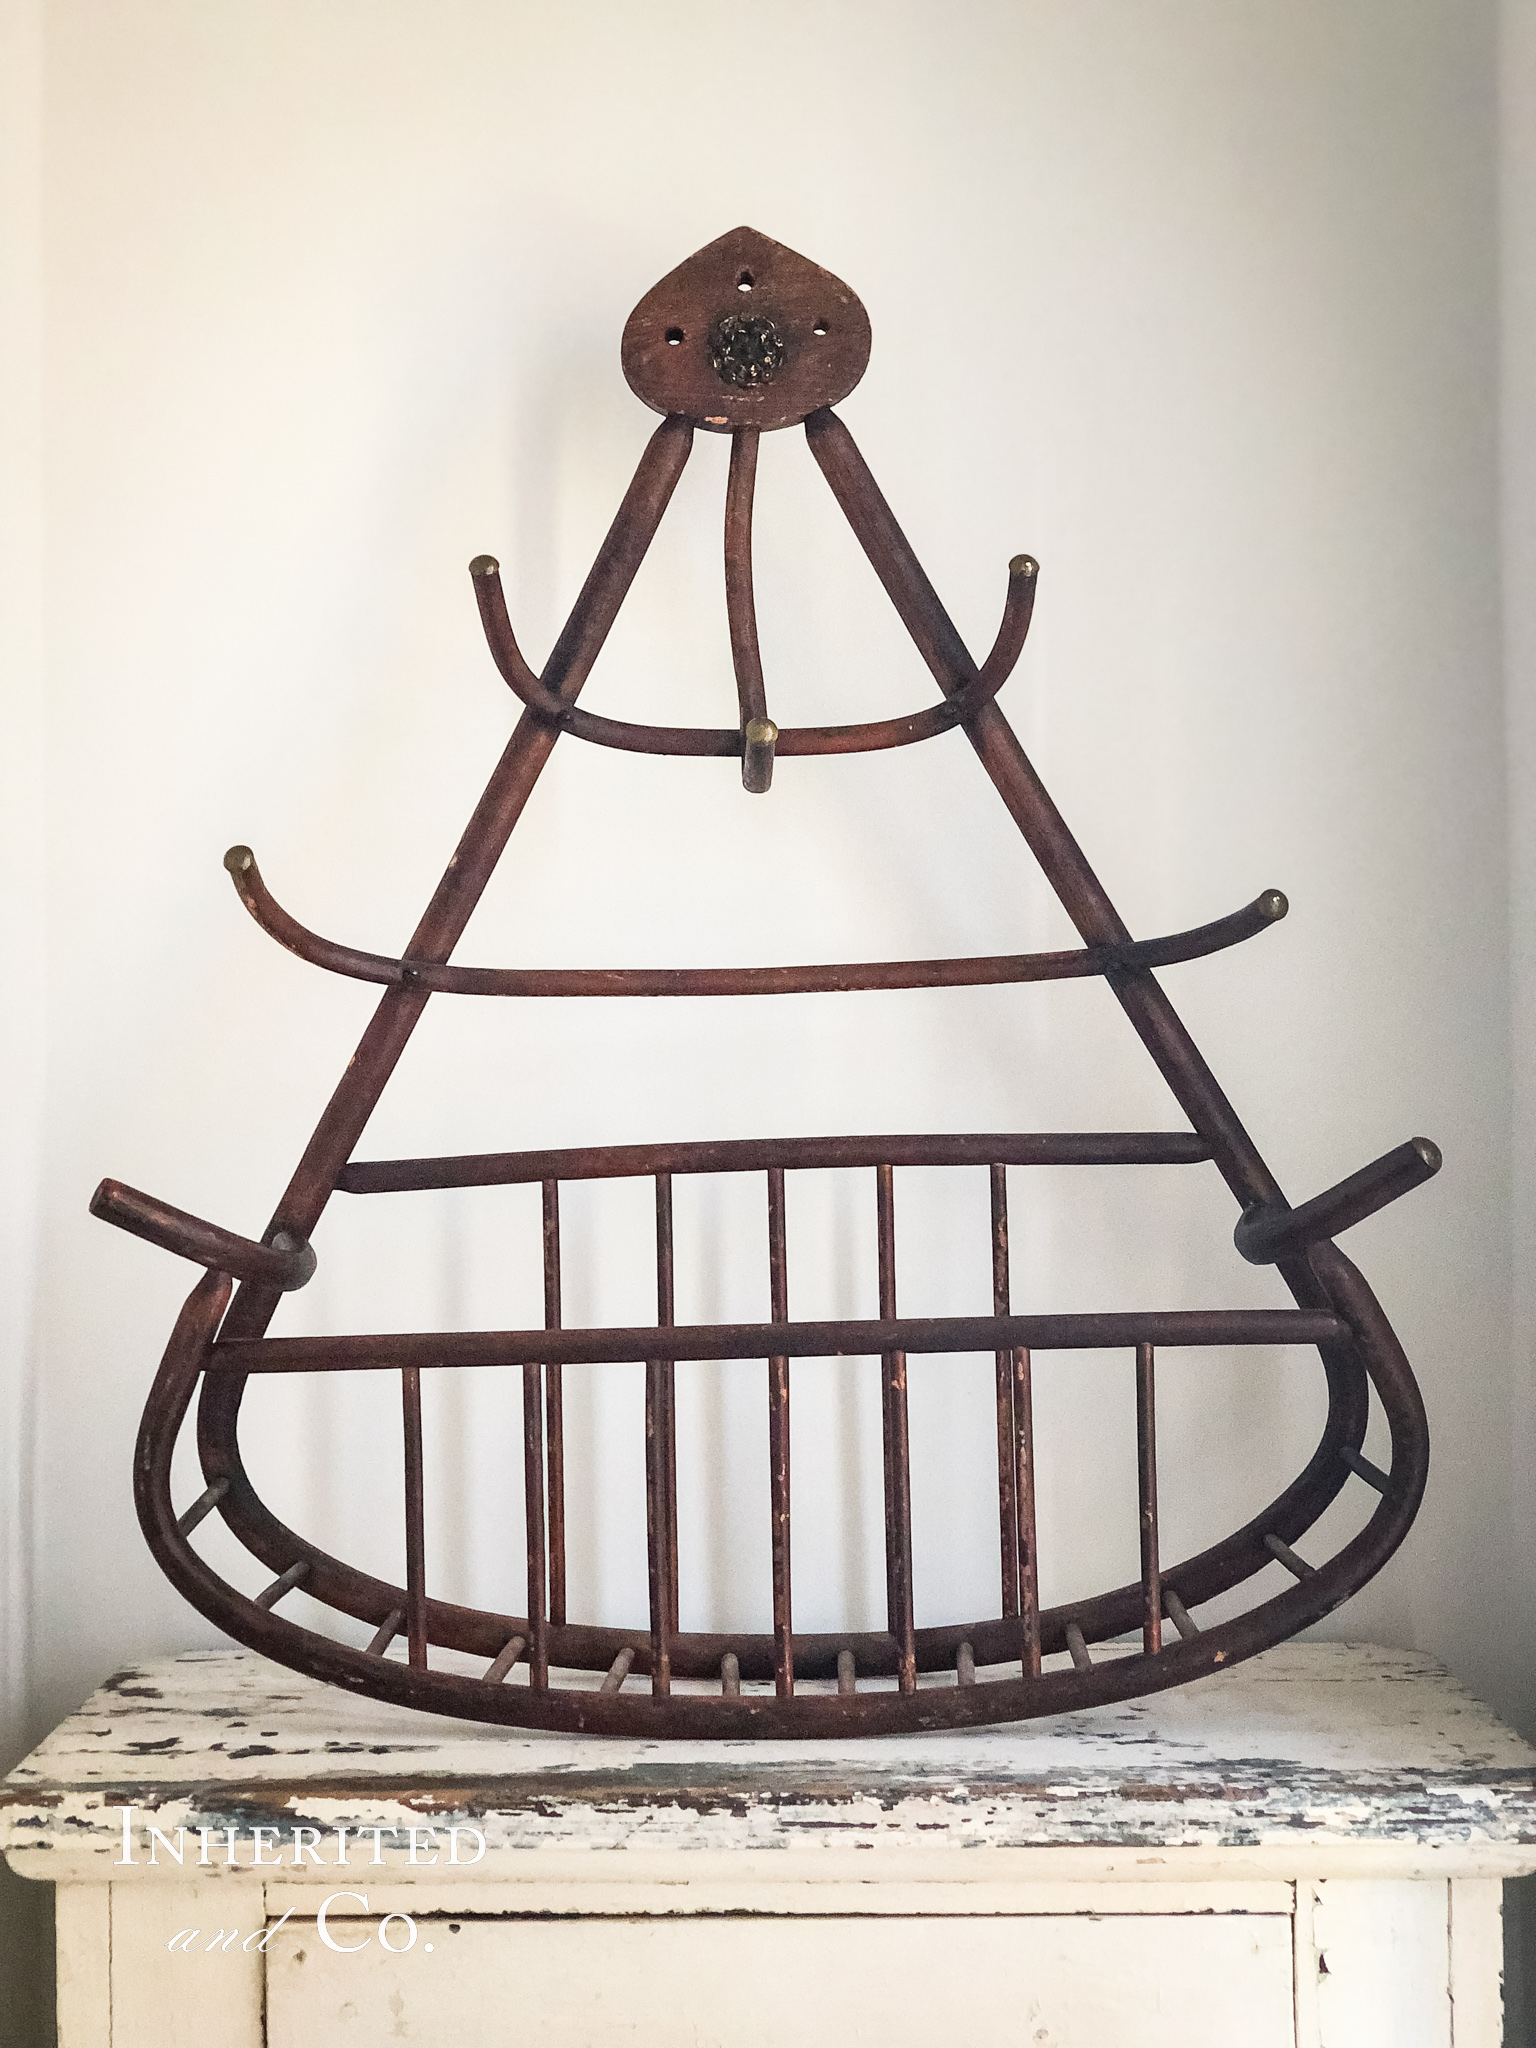 Bentwood hat rack that is triangular in shape and has brass details